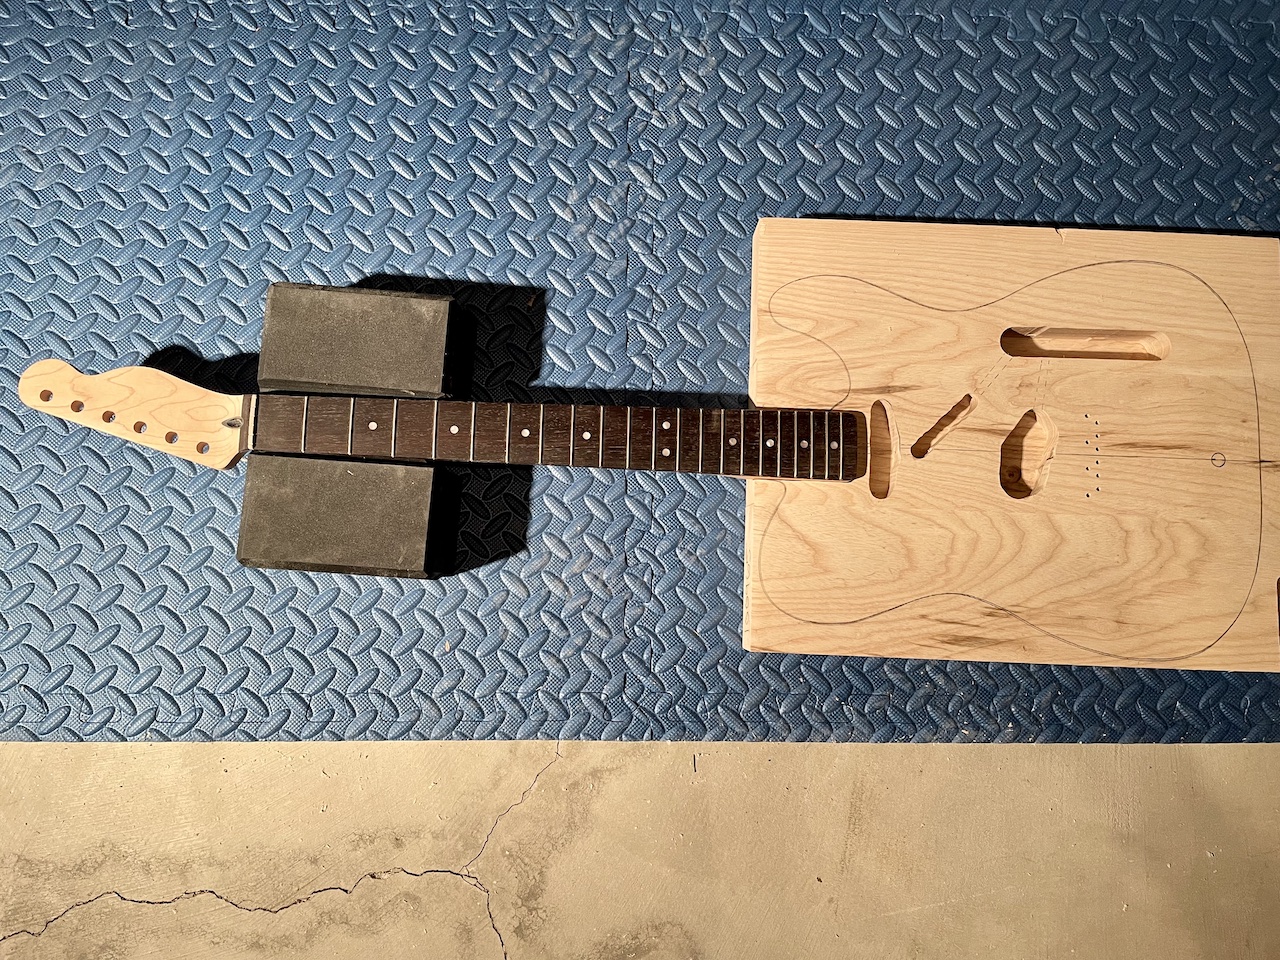 guitar neck fitted into routed neck pocket